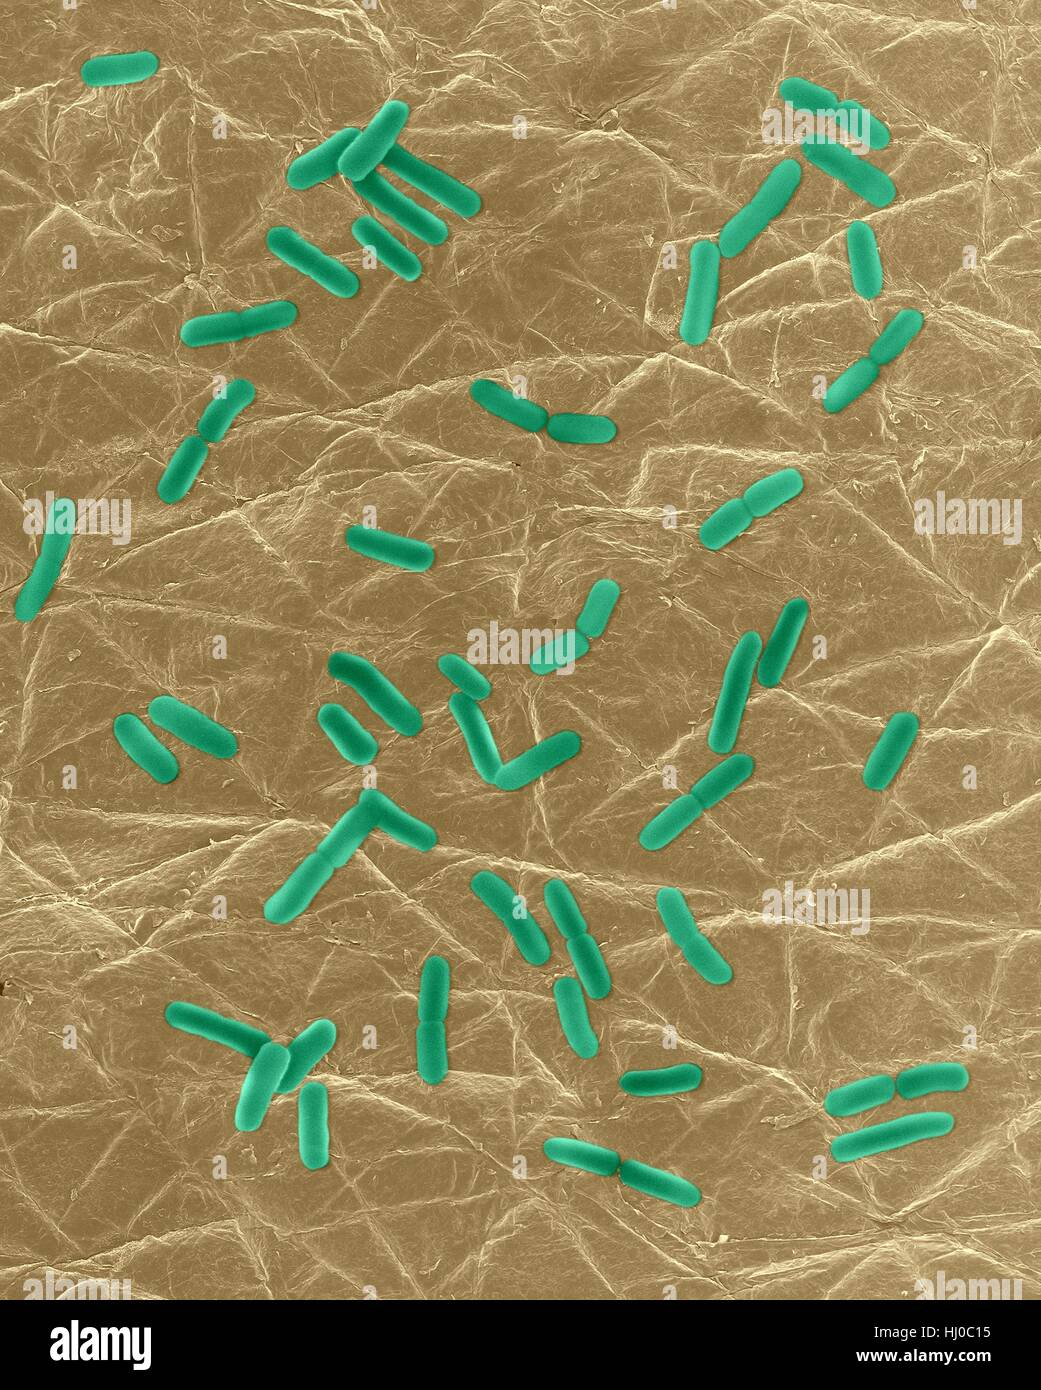 Coloured scanning electron micrograph (SEM) of Photocomposite,E.coli on surface of human skin.Escherichia coli is Gram-negative,facultatively anaerobic,enteric,rod prokaryote.This bacterium is normally part of human animal microbiota.Most E.coli strains are harmless,but some strains can cause serious problems such as: food poisoning,urinary tract infections,traveller's diarrhoea nosocomial infections.The E.coli 0157:H7 strain is fatal to humans if contracted when contaminated meat is cooked inadequately.Magnification: bacteria x800; skin x6 when shortest axis printed at 25 millimetres. Stock Photo